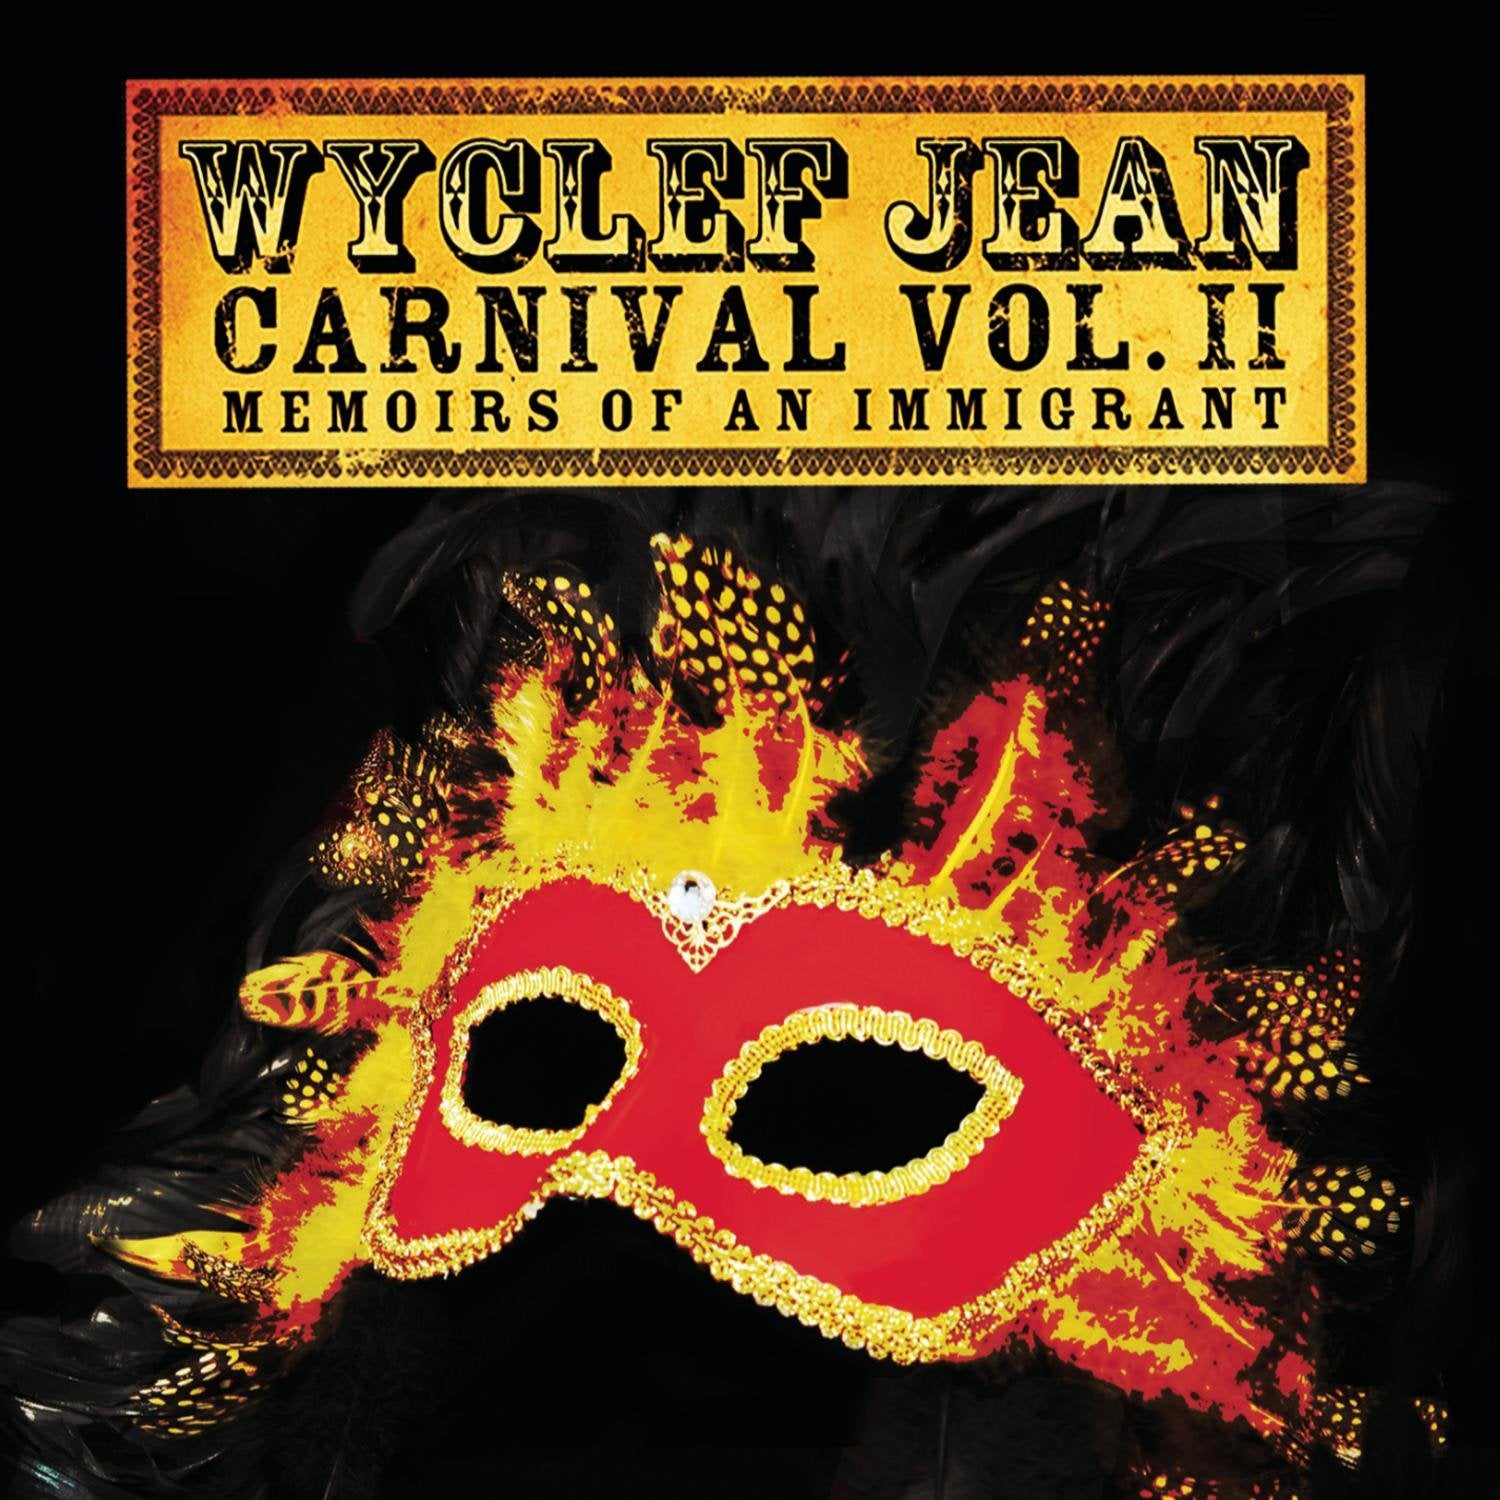 Wyclef Jean- Carnival Vol. II (Memoirs Of An Immigrant) - Darkside Records